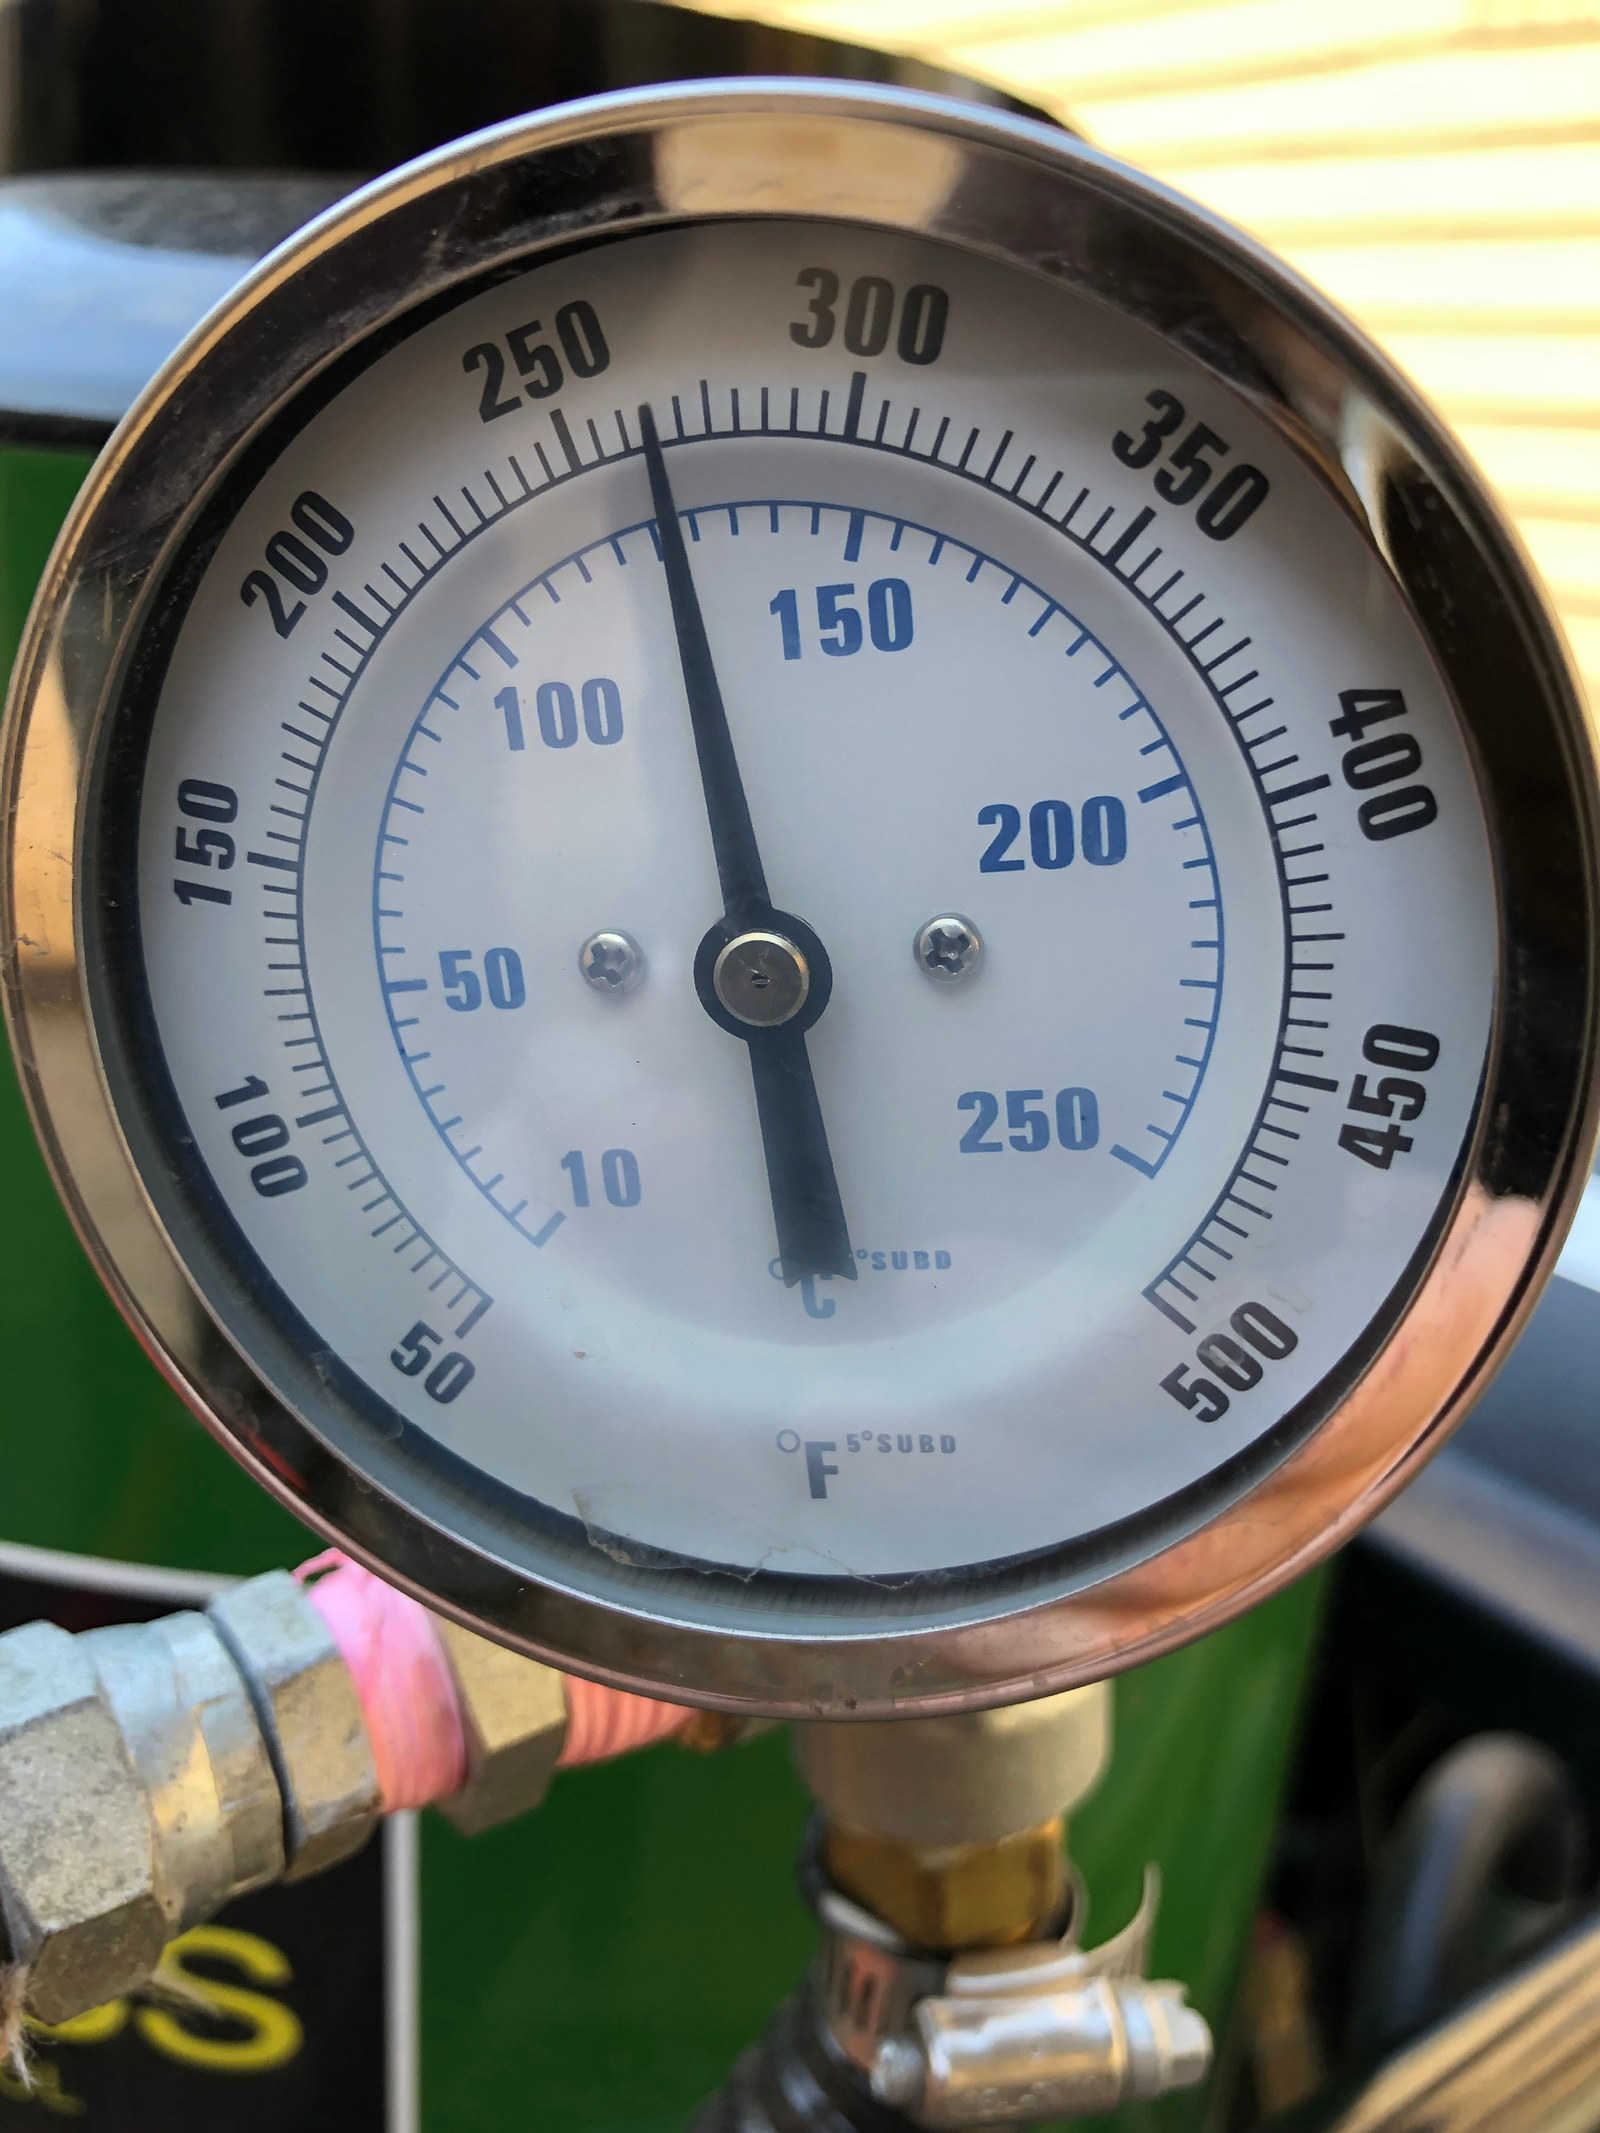 the temperature guage on the steam weeder sits at 125 degrees